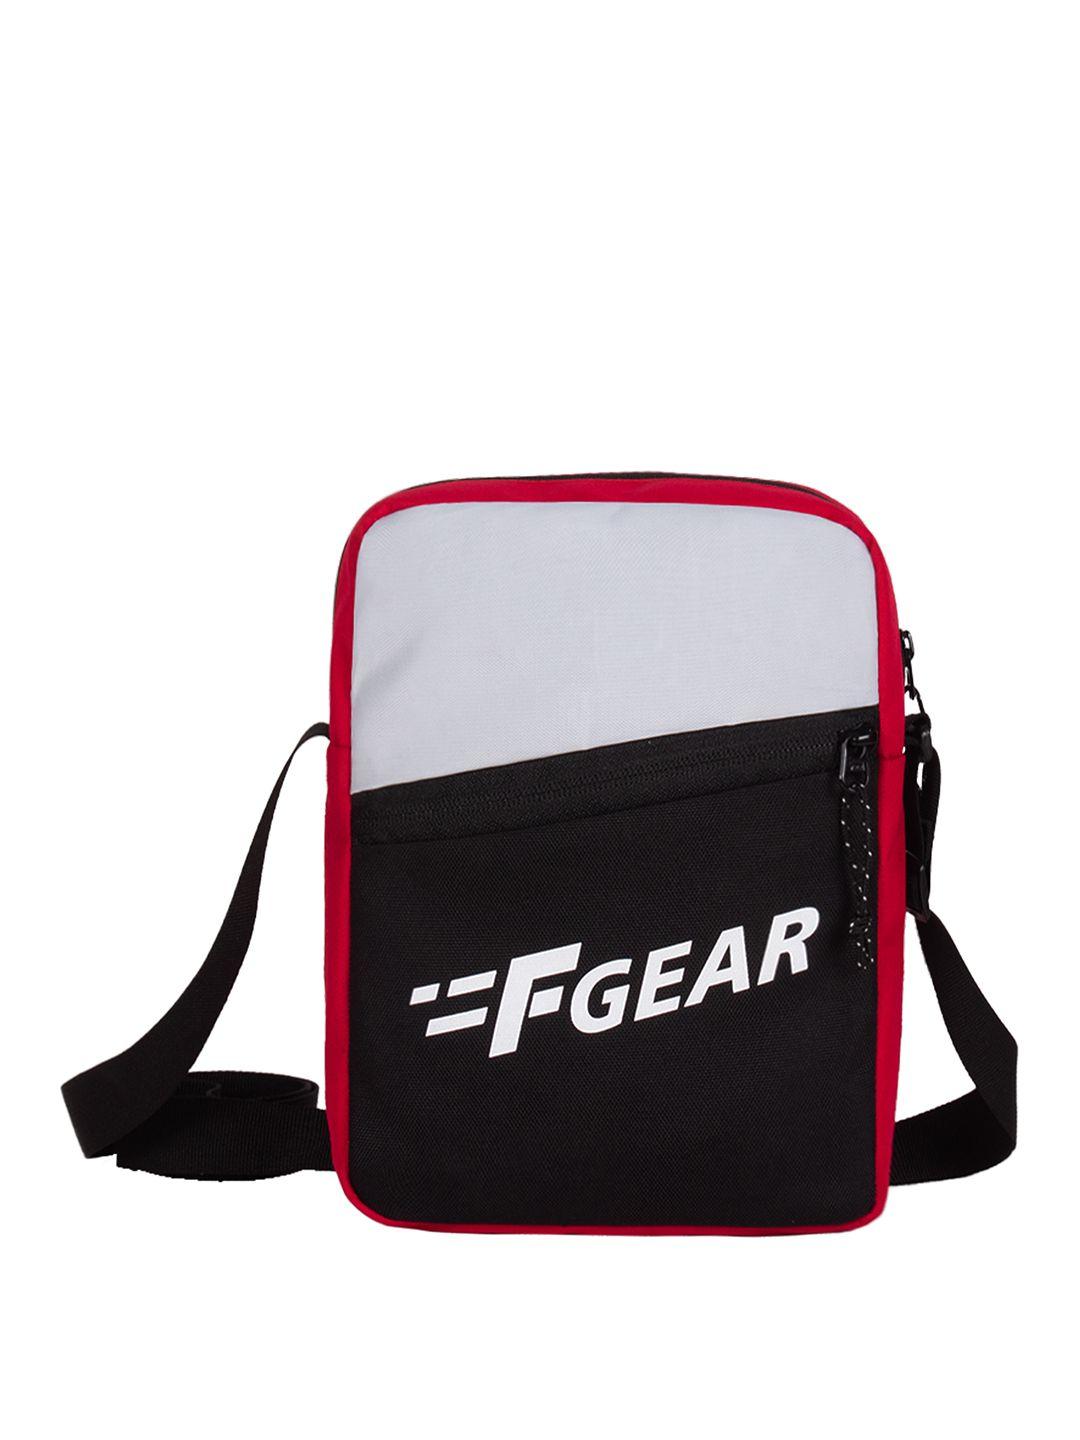 f-gear-printed-structured-sling-bag